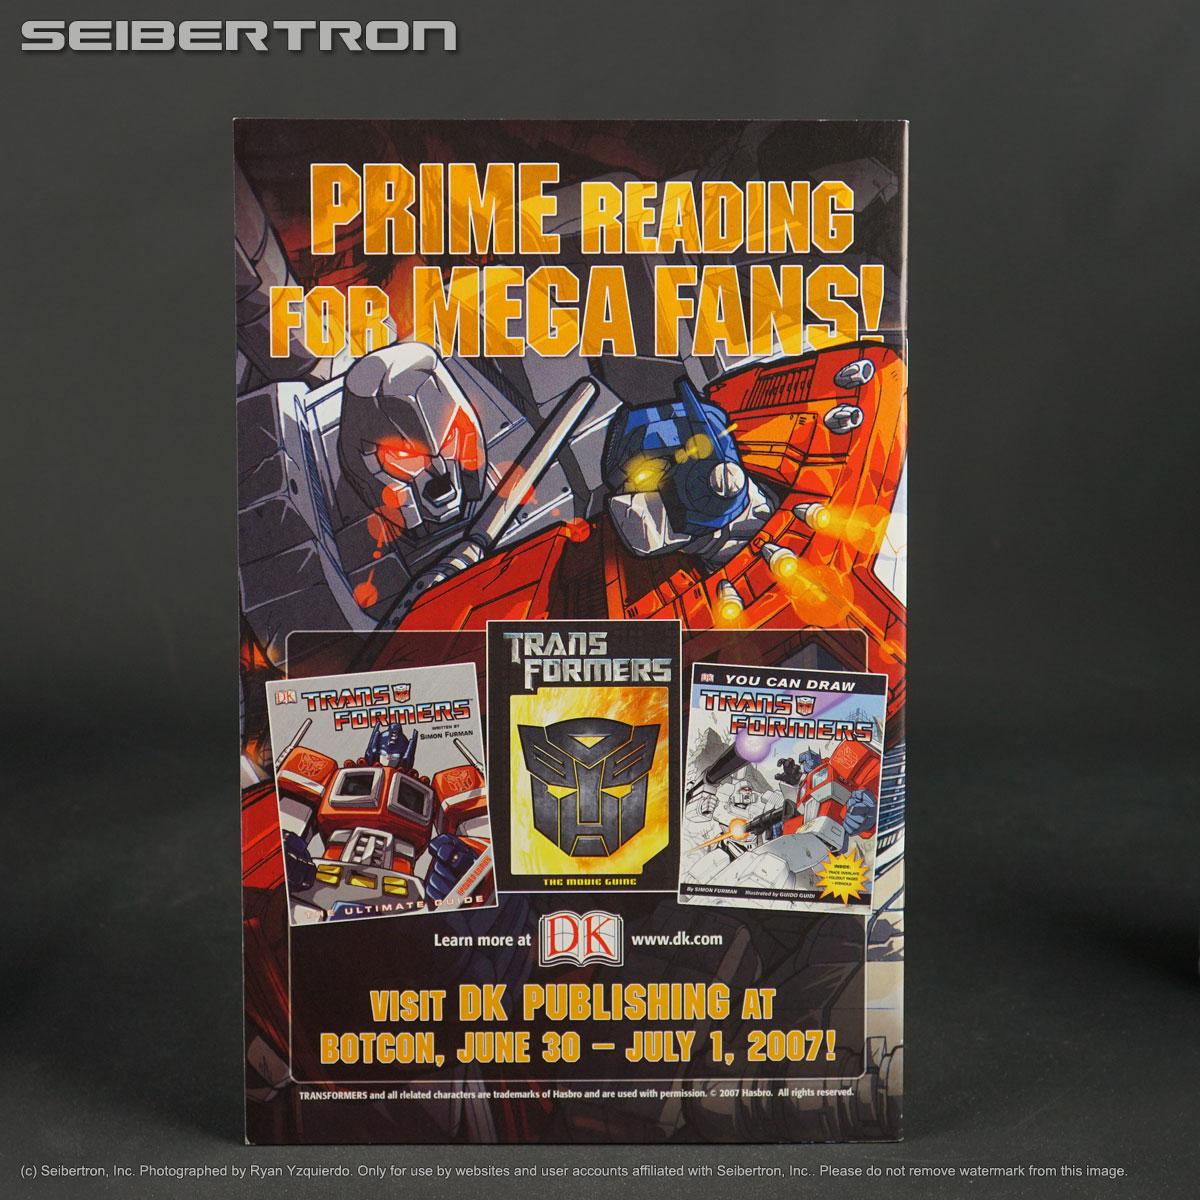 Transformers toys, Comic Books, BotBots, Masters of the Universe, Teenage Mutant Ninja Turtles, Gobots, and other listings from Seibertron.com: TRANSFORMERS TIMELINES #2 BotCon 2007 200610A (CA/A) Milne (W) Lee + Sinclair + Yee